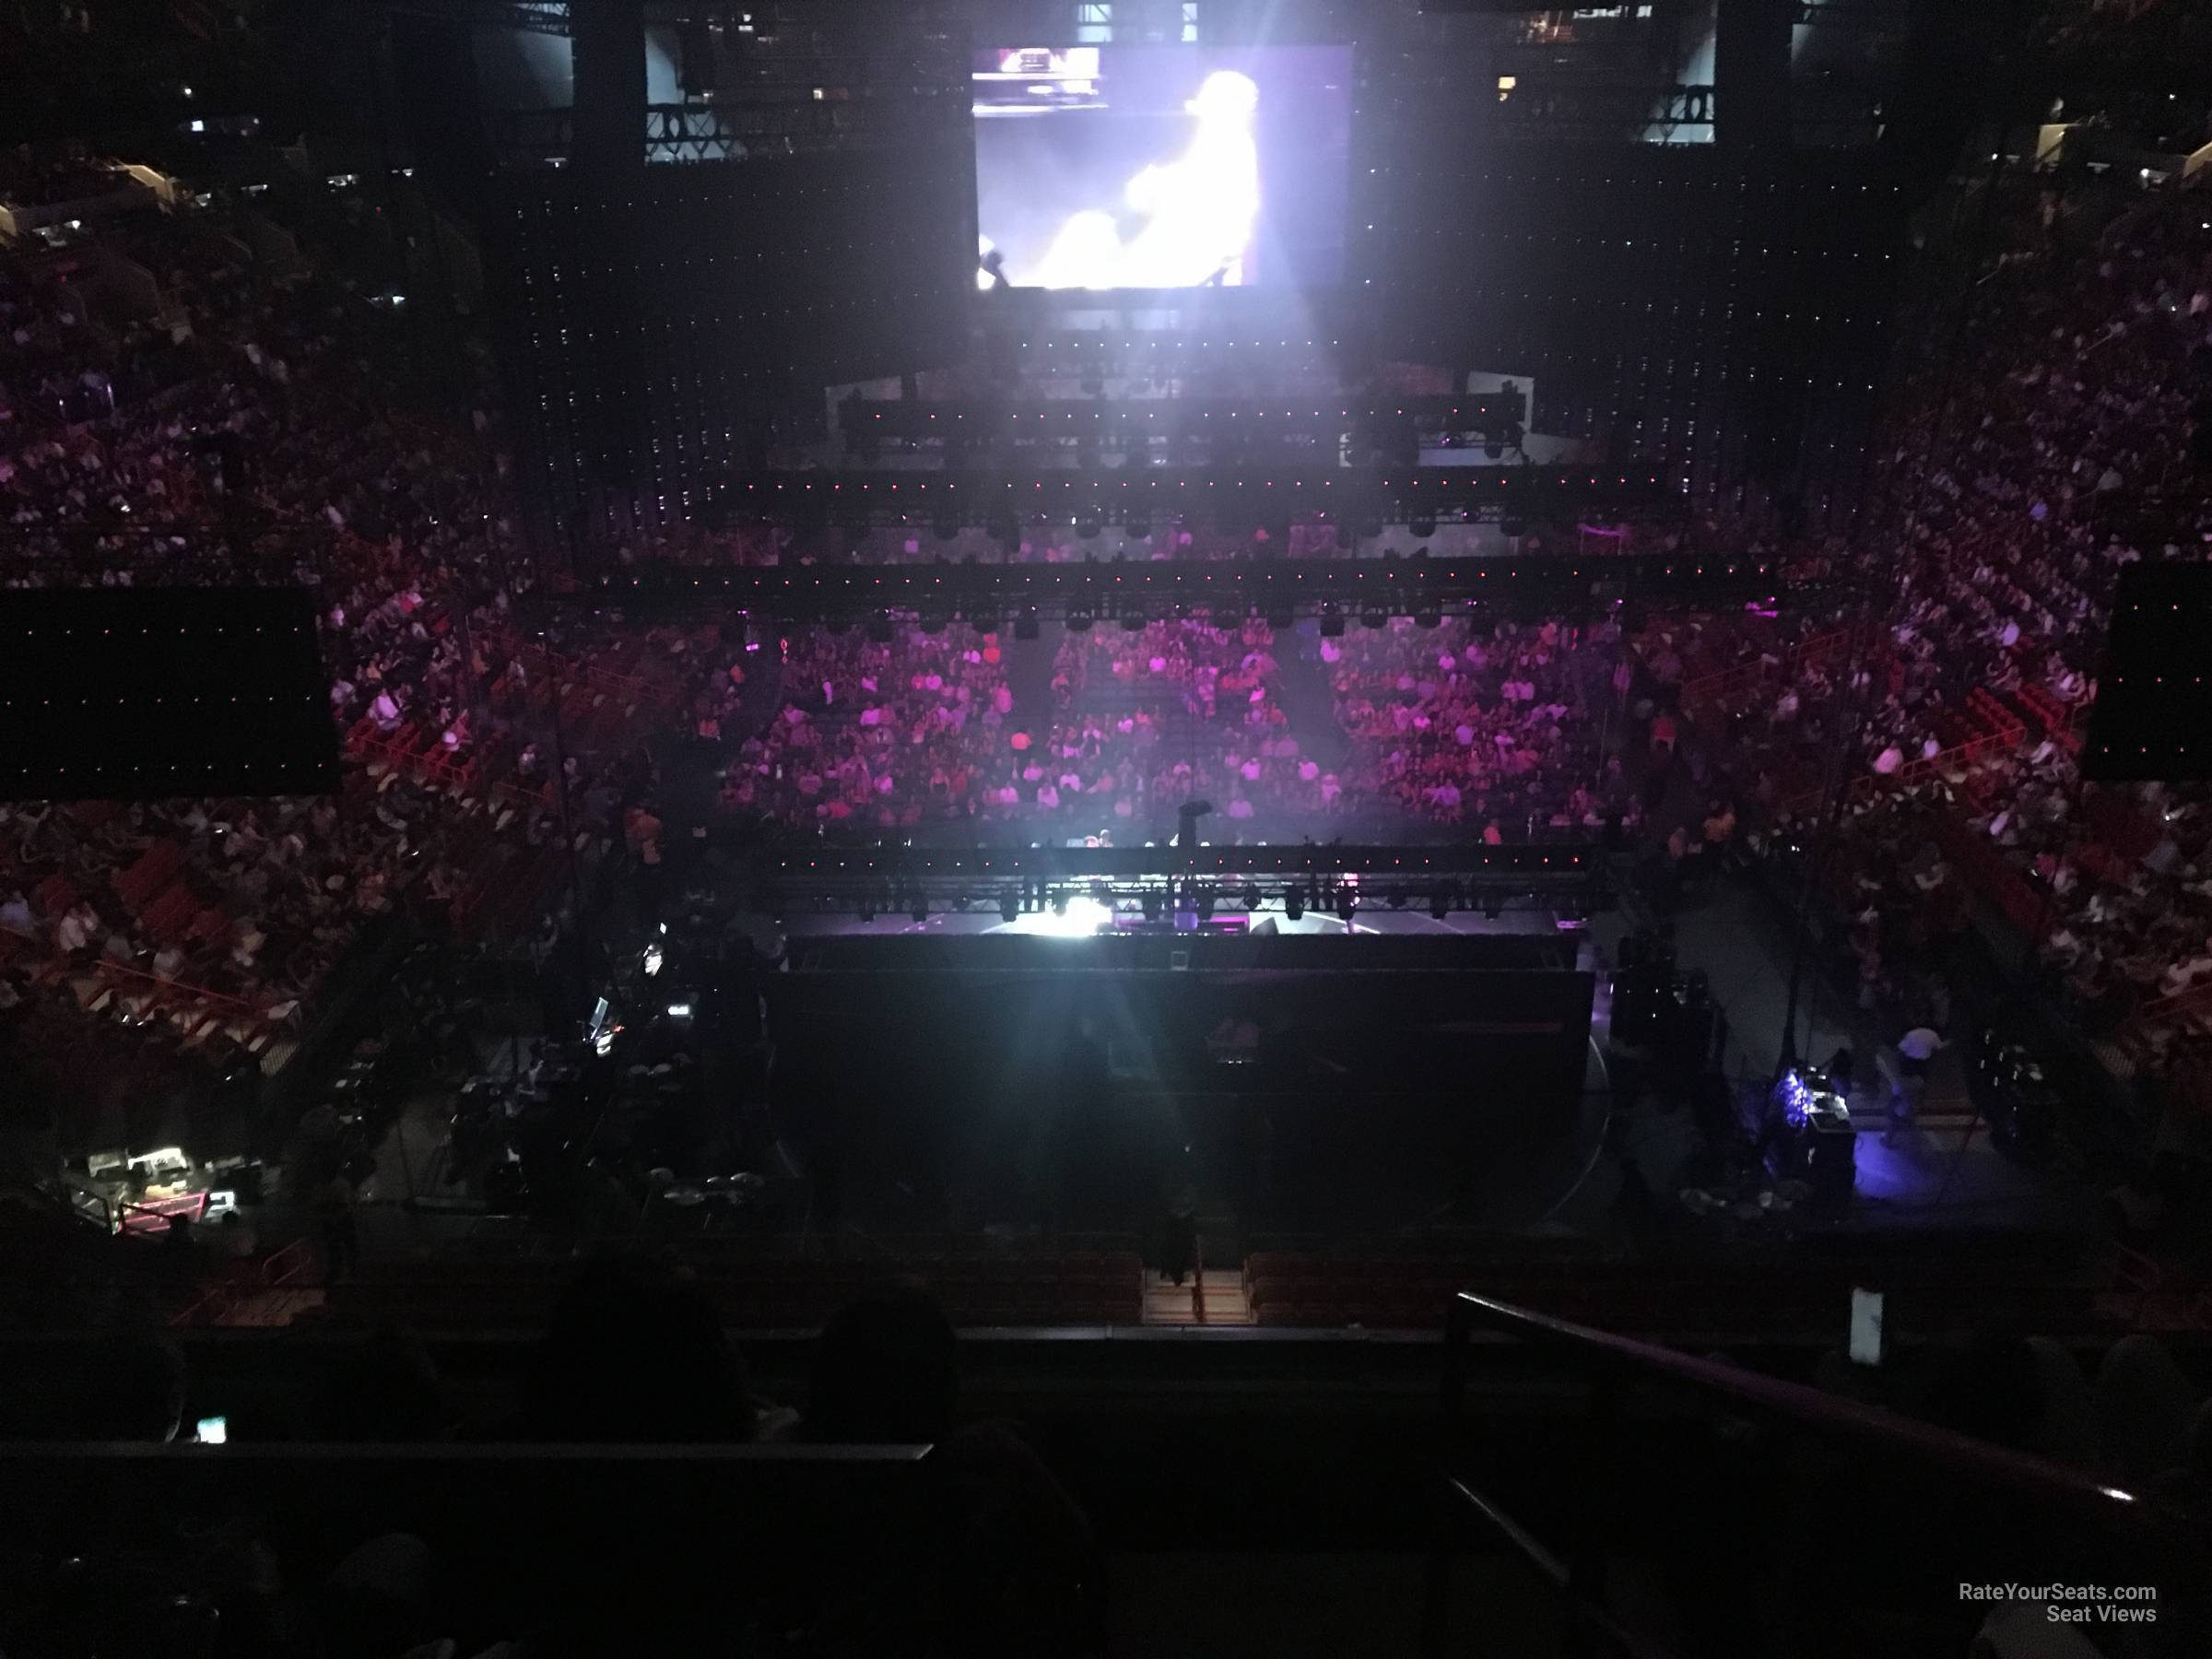 section 332, row 3 seat view  for concert - kaseya center